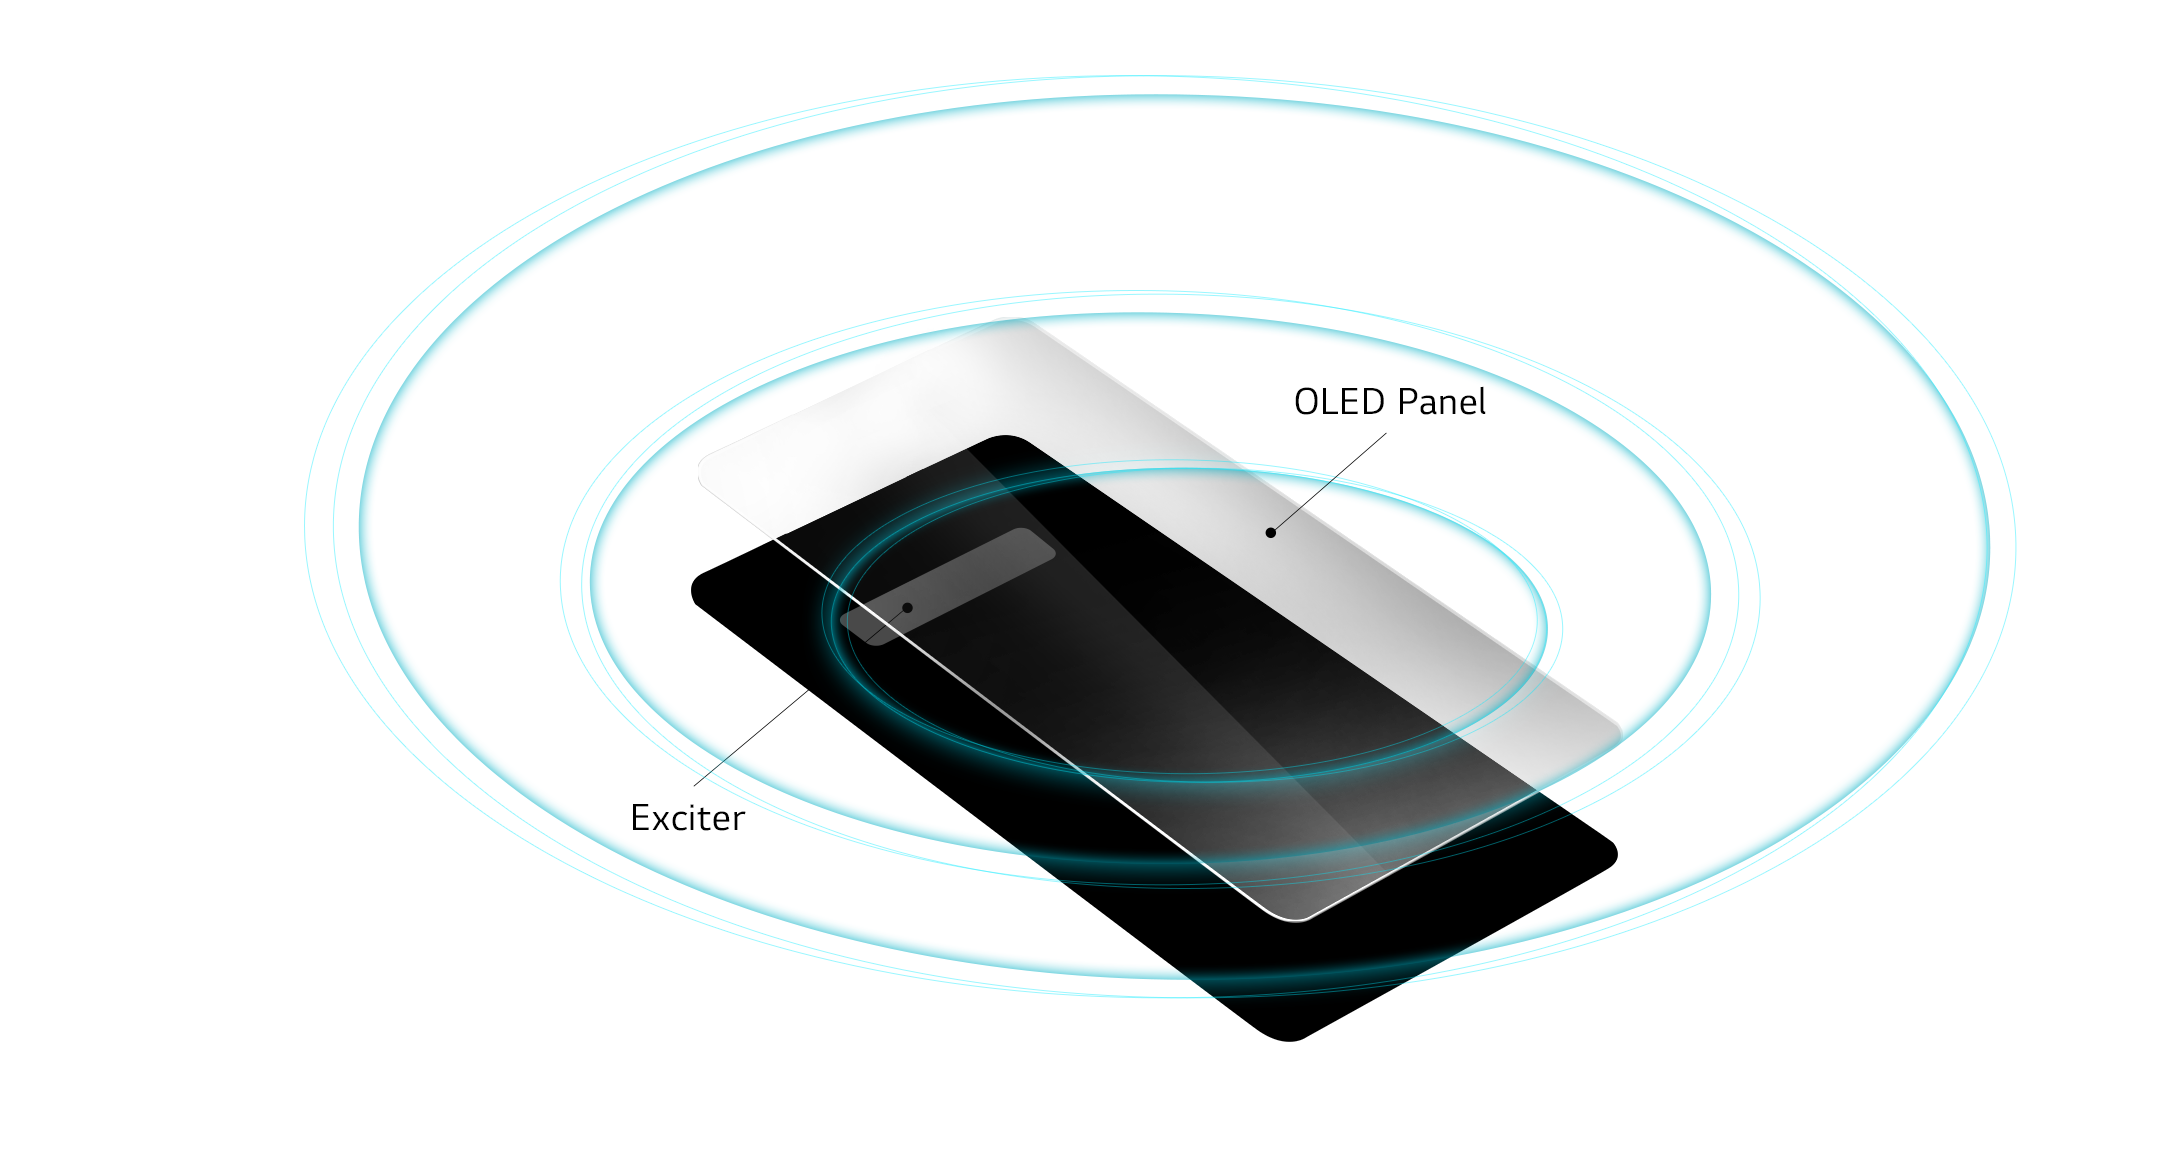 A graphic showing off the new Crystal Sound OLED, which will be included in the LG G8 ThinQ